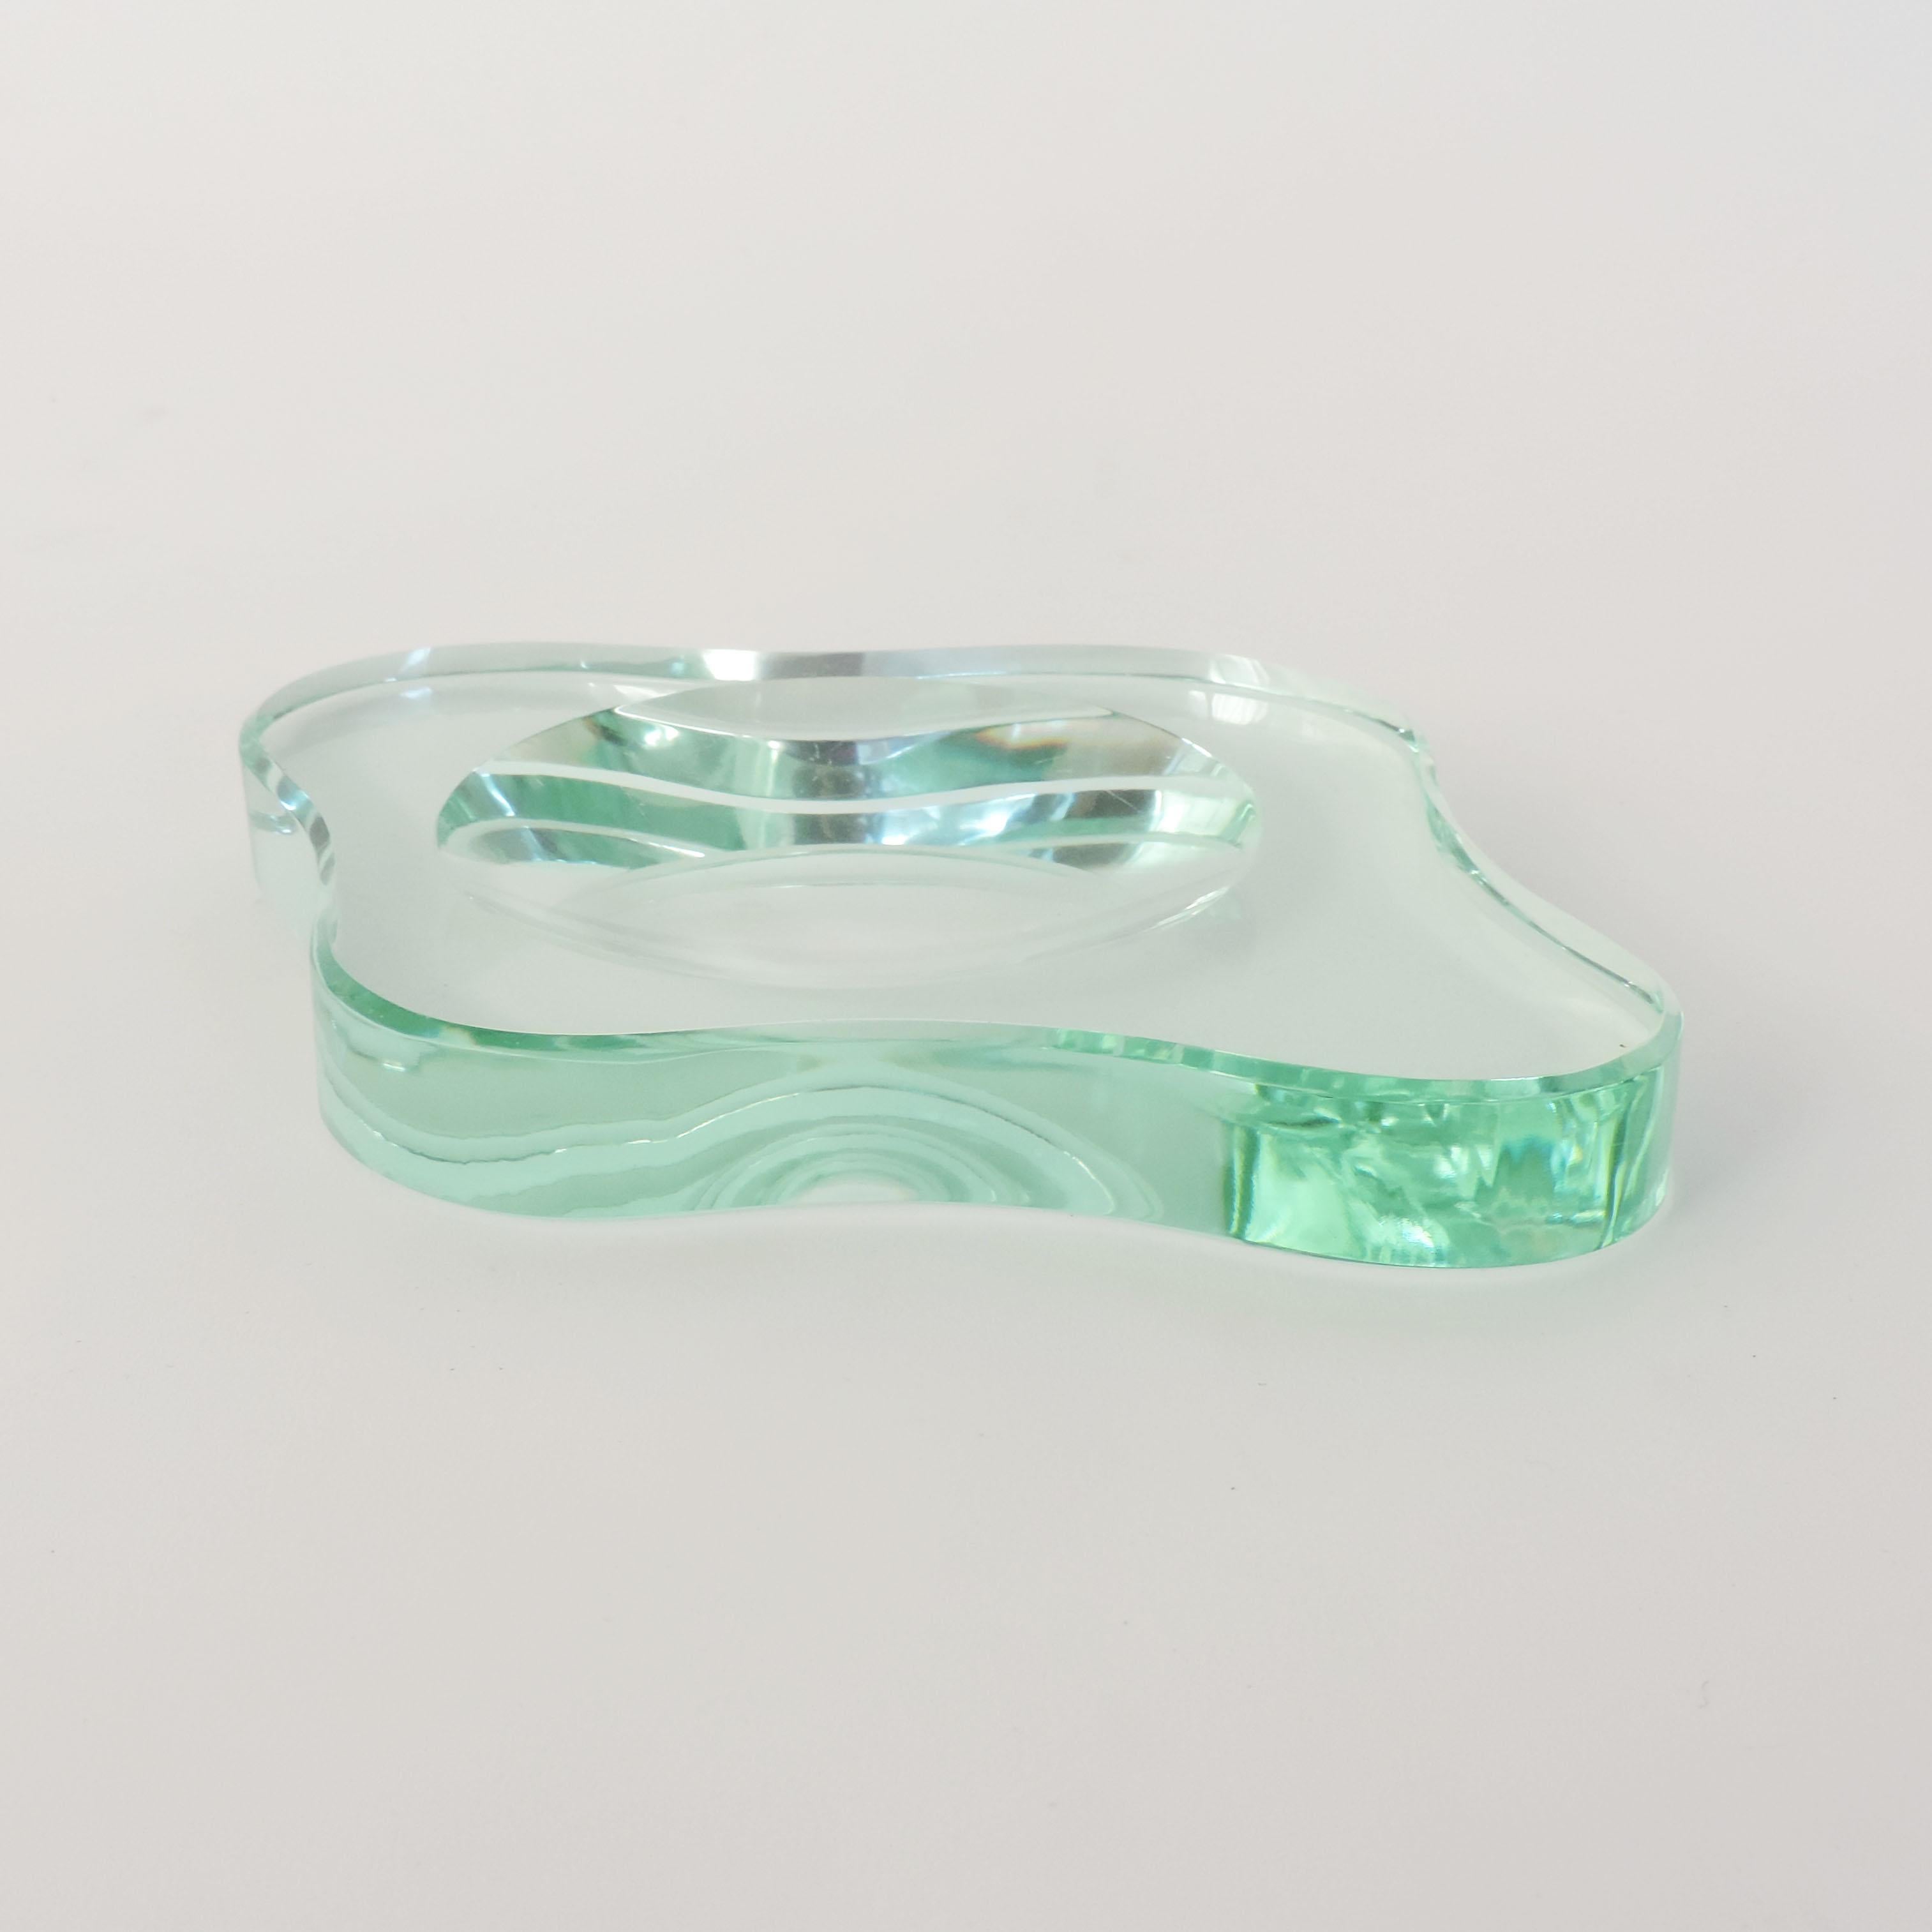 Freeform Fontana Arte 1950s Glass Ashtray In Good Condition For Sale In Milan, IT